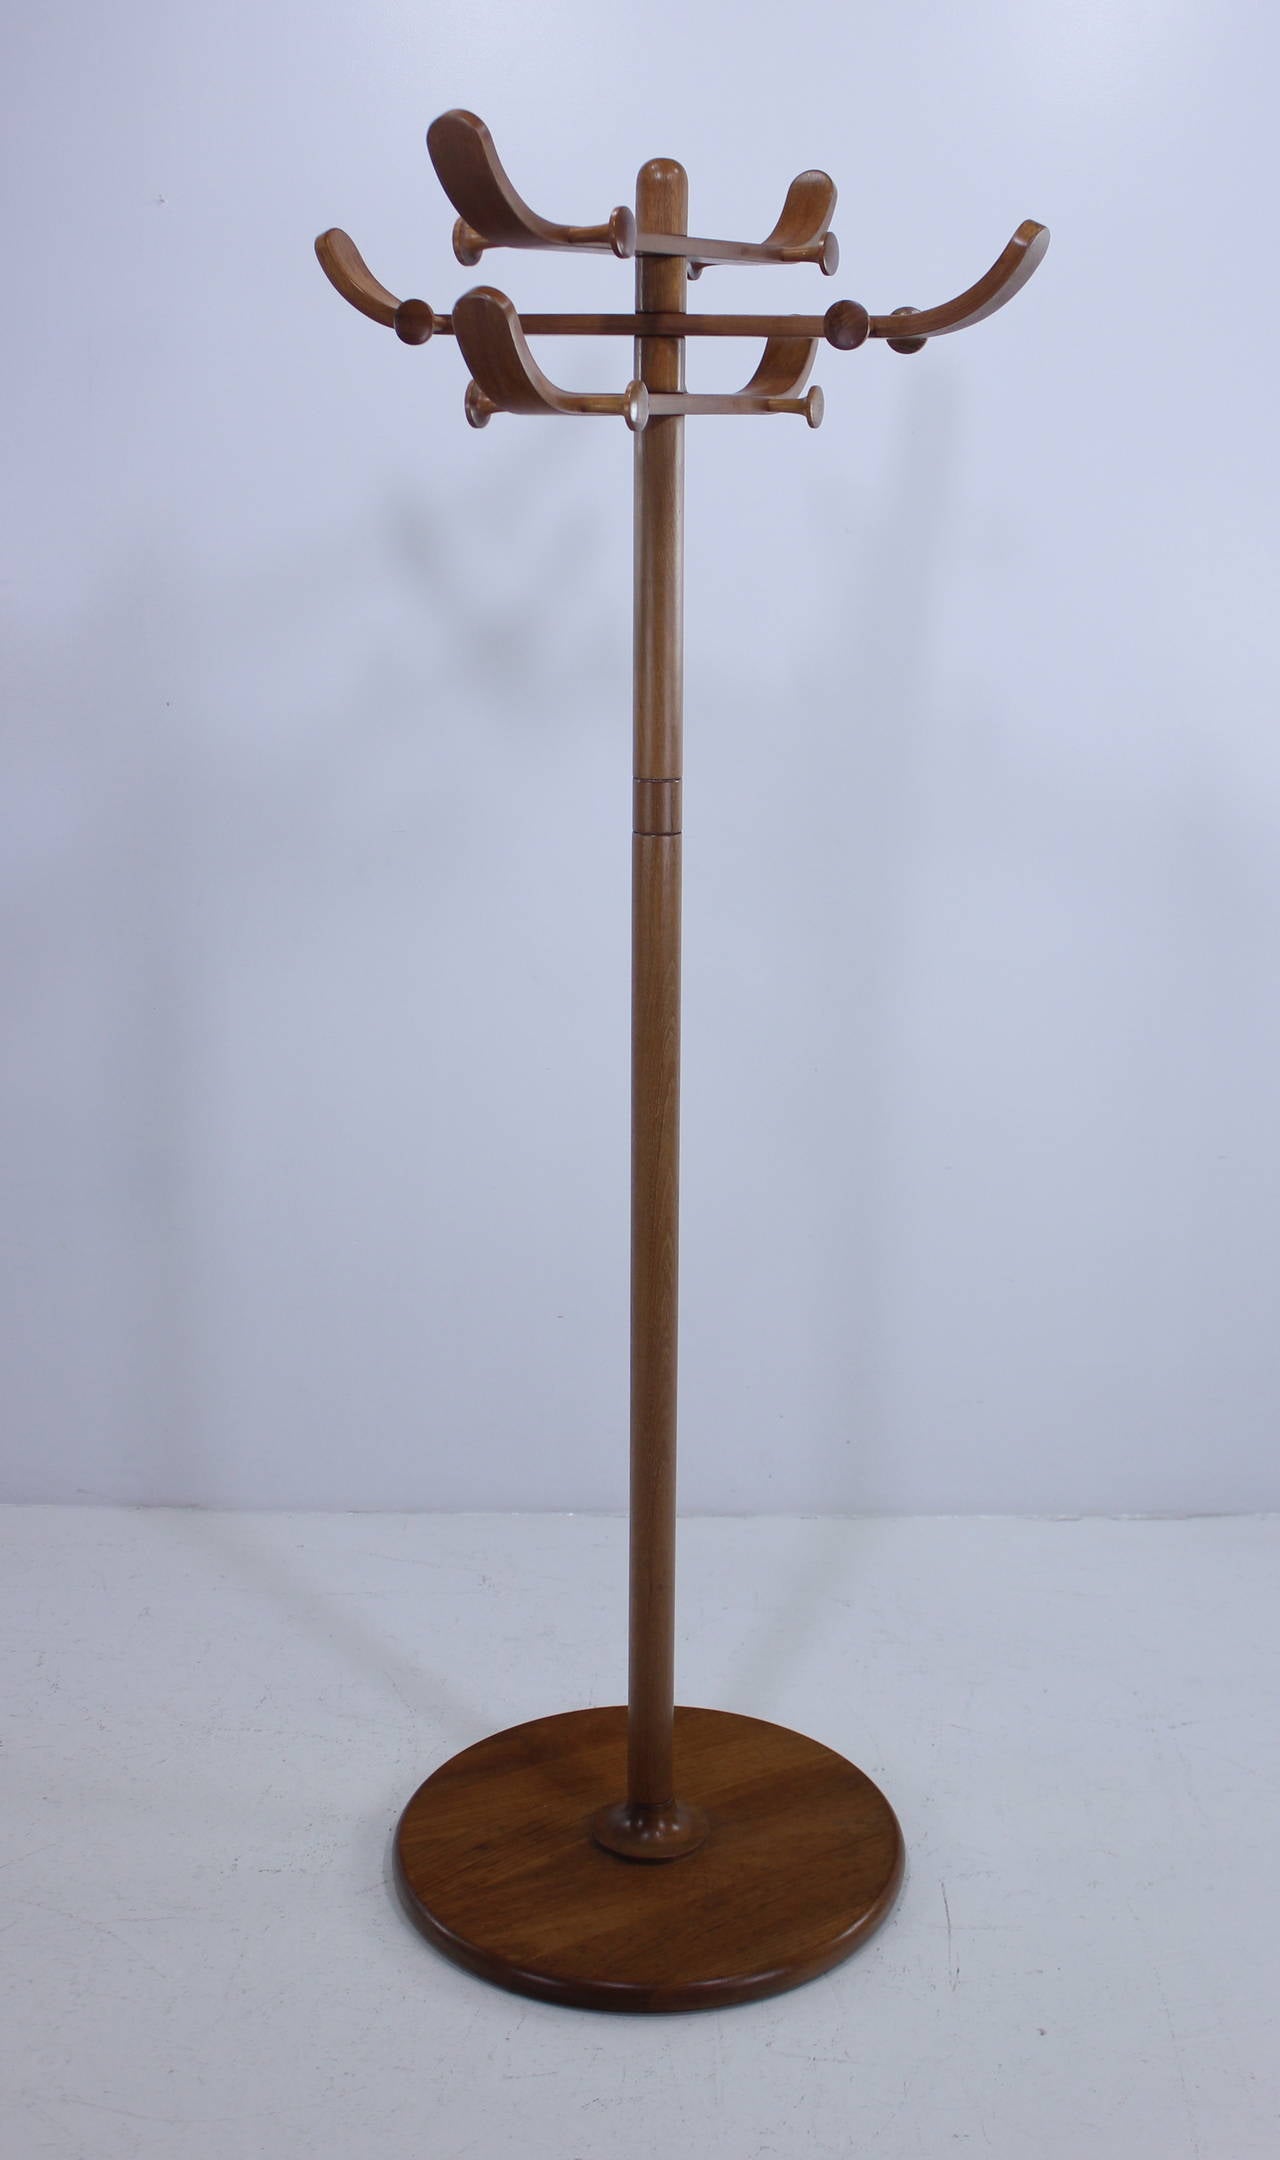 Rare Danish modern coat stand, with nordic flair, designed by Aksel Kjersgaard.
Exceptionally sturdy teak stand accommodates coats, jackets and hats.
Disassembles for easy storage and shipping.
Professionally restored and refinished by